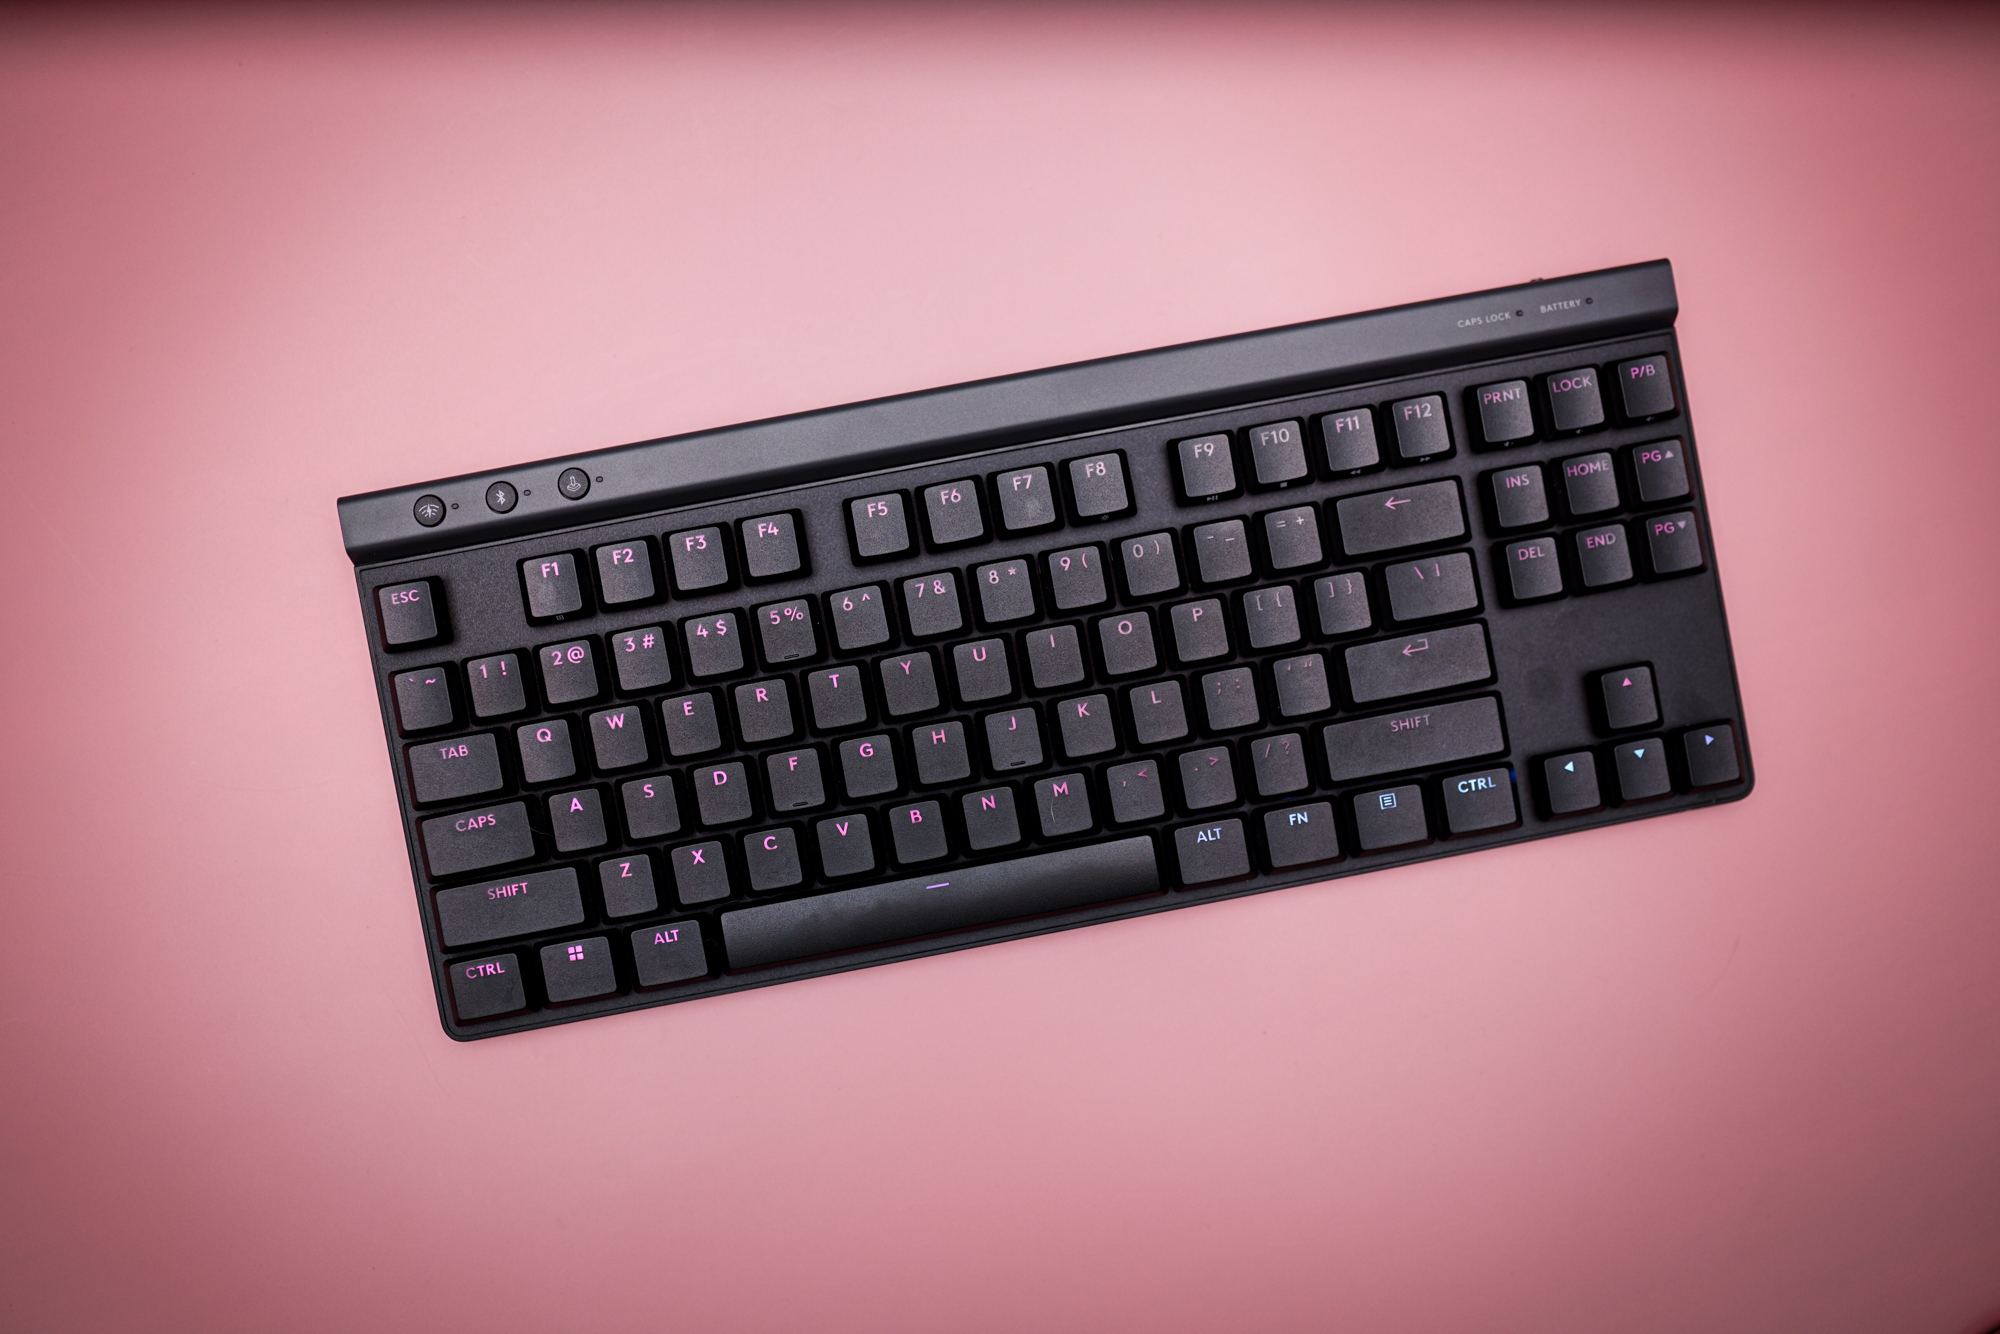 The Logitech G515 keyboard on a pink background.